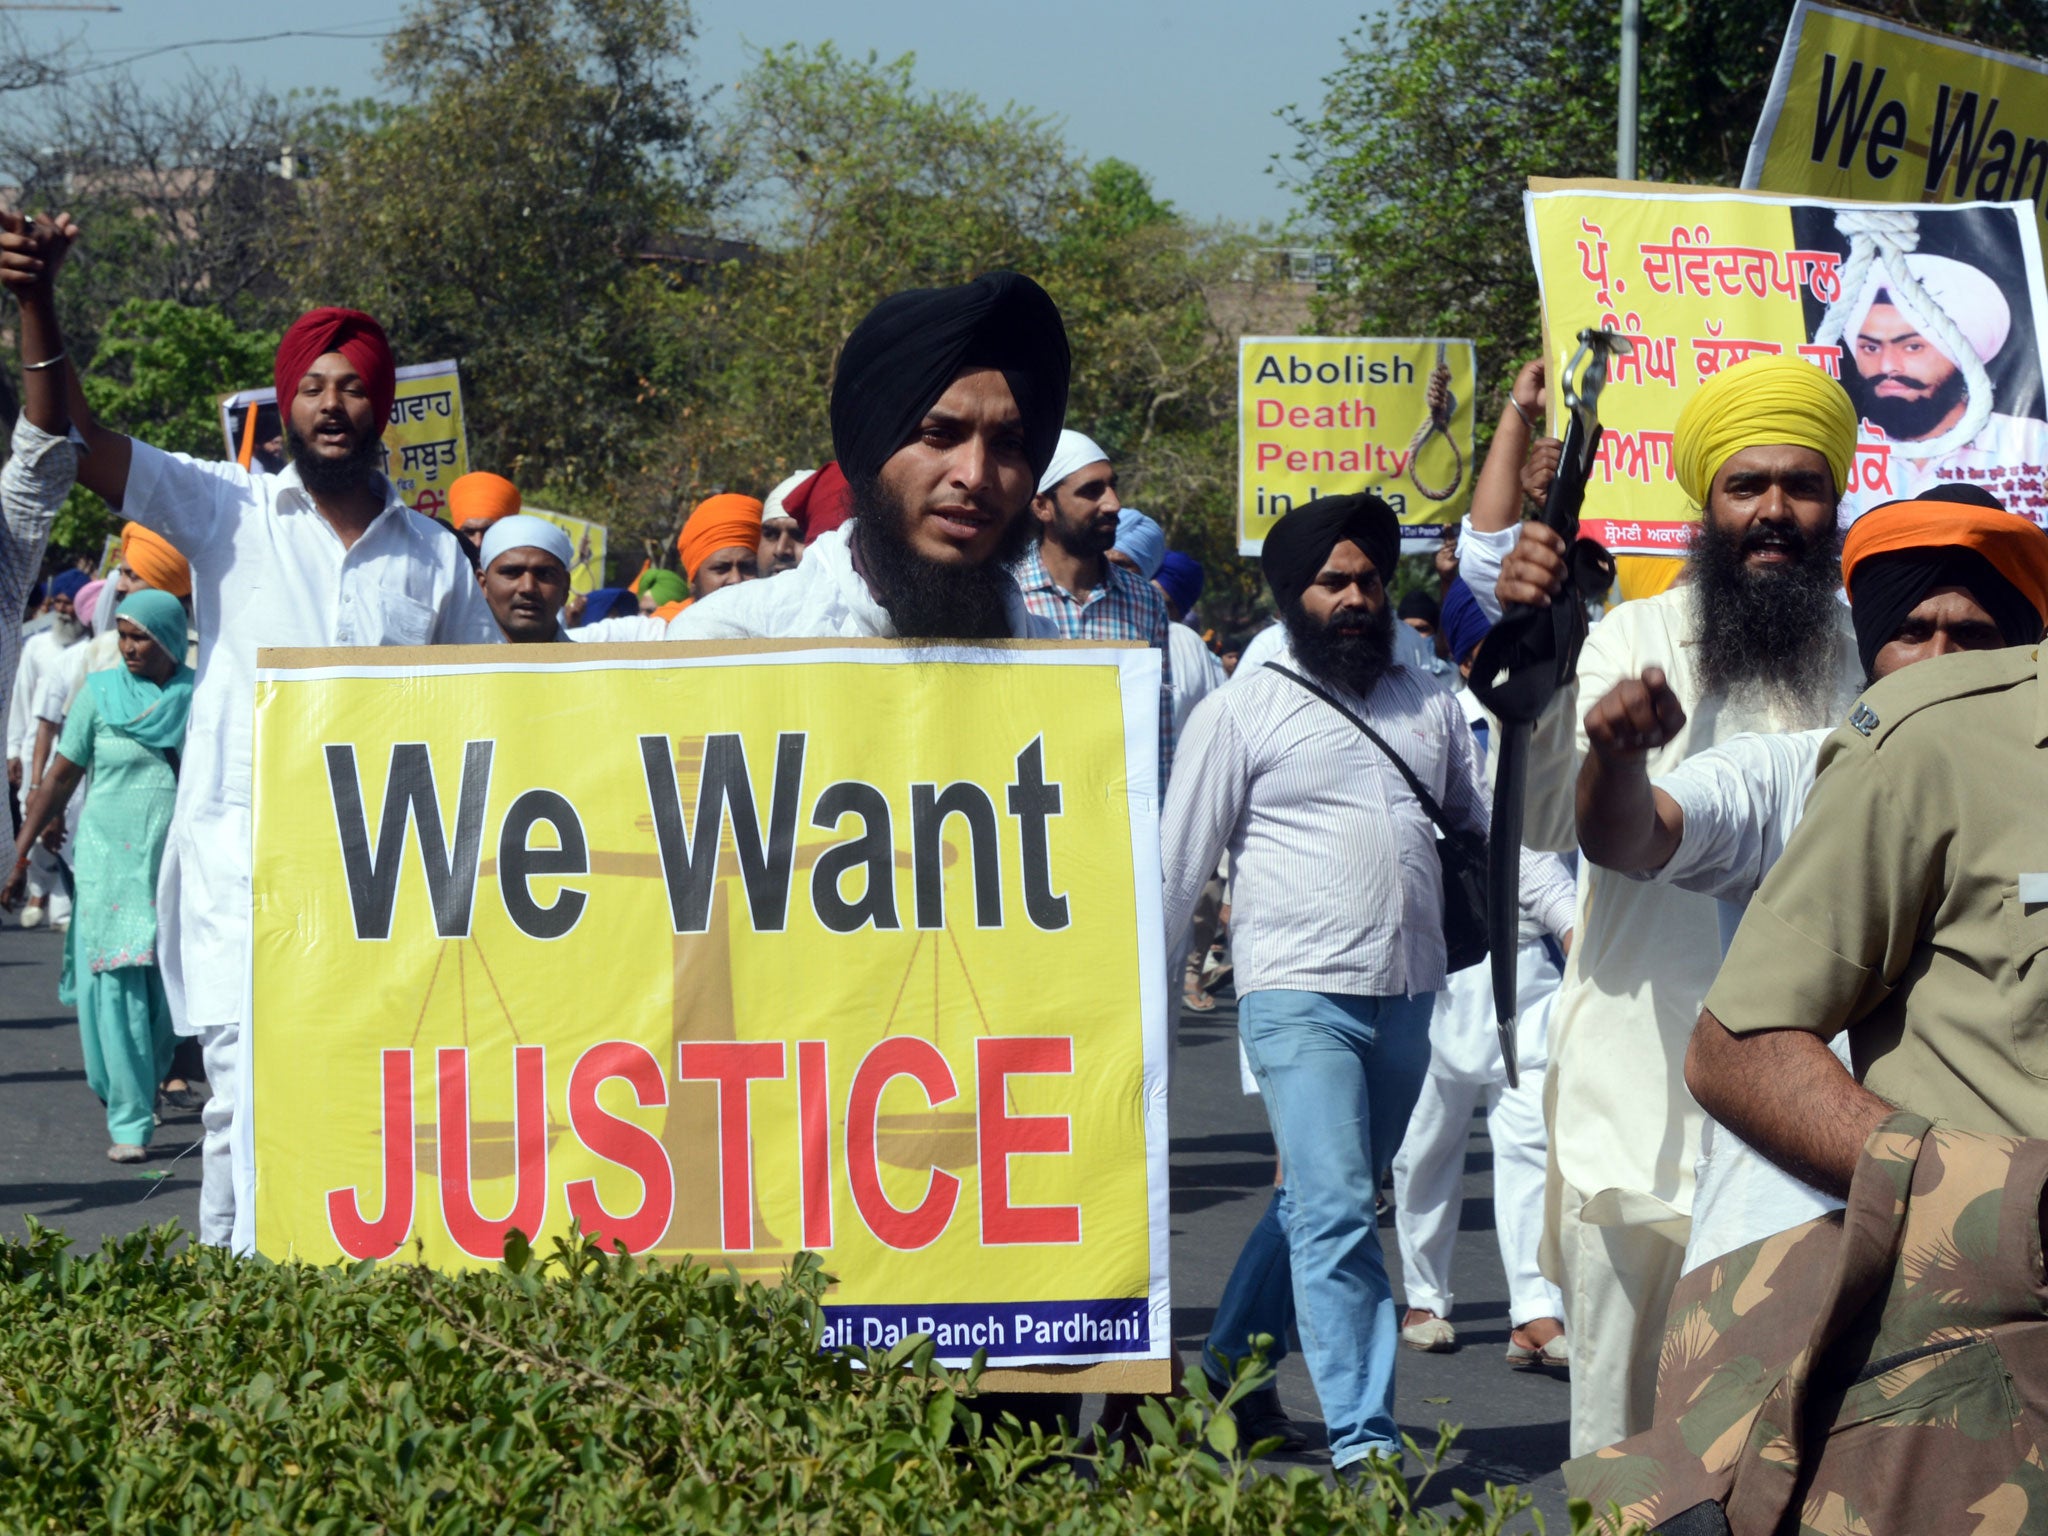 Indian Sikhs shout slogans during a protest march to the Presidential palace in New Delhi on April 19, 2013, against the Supreme Court rejection of a petition by Devinderpal Singh Bhullar to change his death sentence to life imprisonment. Bhullar was given the death sentance, on August 25, 2001, for the September 10, 1993 blast at the Indian Youth Congress (IYC) office in New Delhi that left nine people dead and many injured.